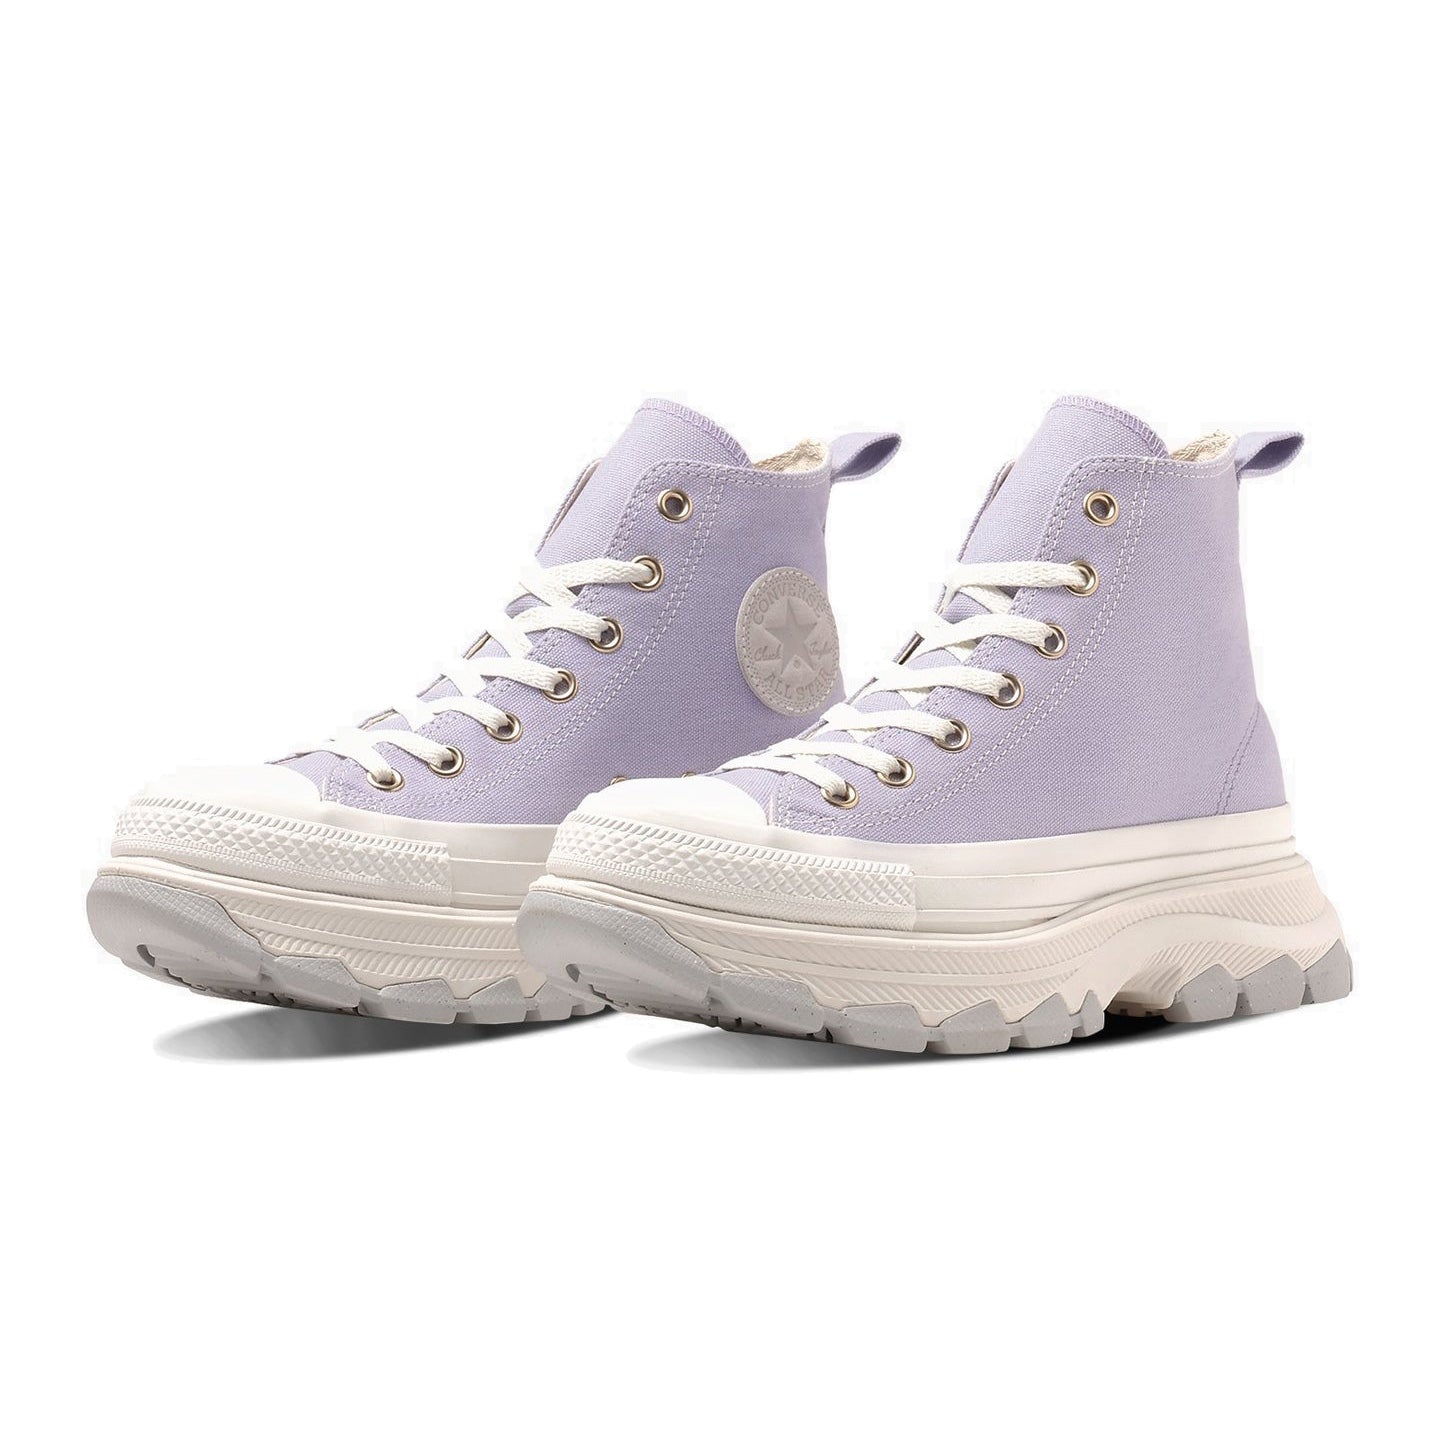 ALL STAR (R) TREKWAVE NC HI – Kinetics｜OFFICIAL ONLINE STORE